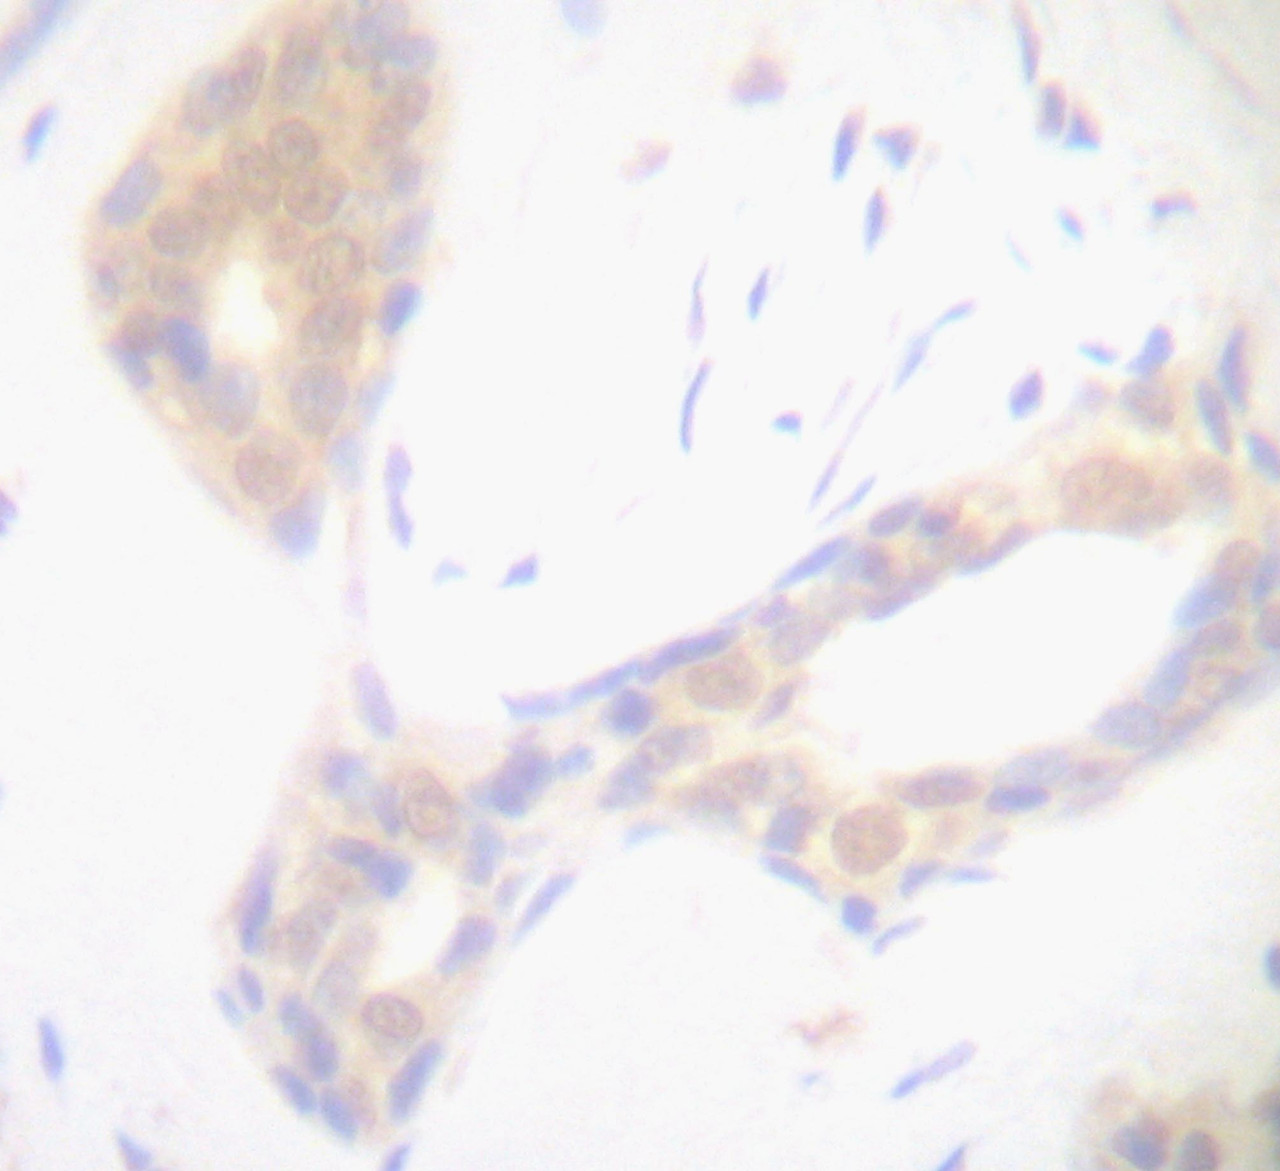 This antibody stained formalin-fixed, paraffin-embedded sections of human breast invasive ductal carcinoma. The recommended concentrations are 2.5 ug/ml-5.0 ug/ml with a two-hour incubation at room temperature or an overnight incubation at 4&#730;C. An HRP-labeled polymer detection system was used with a DAB chromogen. This antibody was also tested in an HRP-biotin labeling detection system. Heat induced antigen retrieval with a pH 6.0 Sodium Citrate buffer is recommended. Optimal concentrations and conditions may vary.